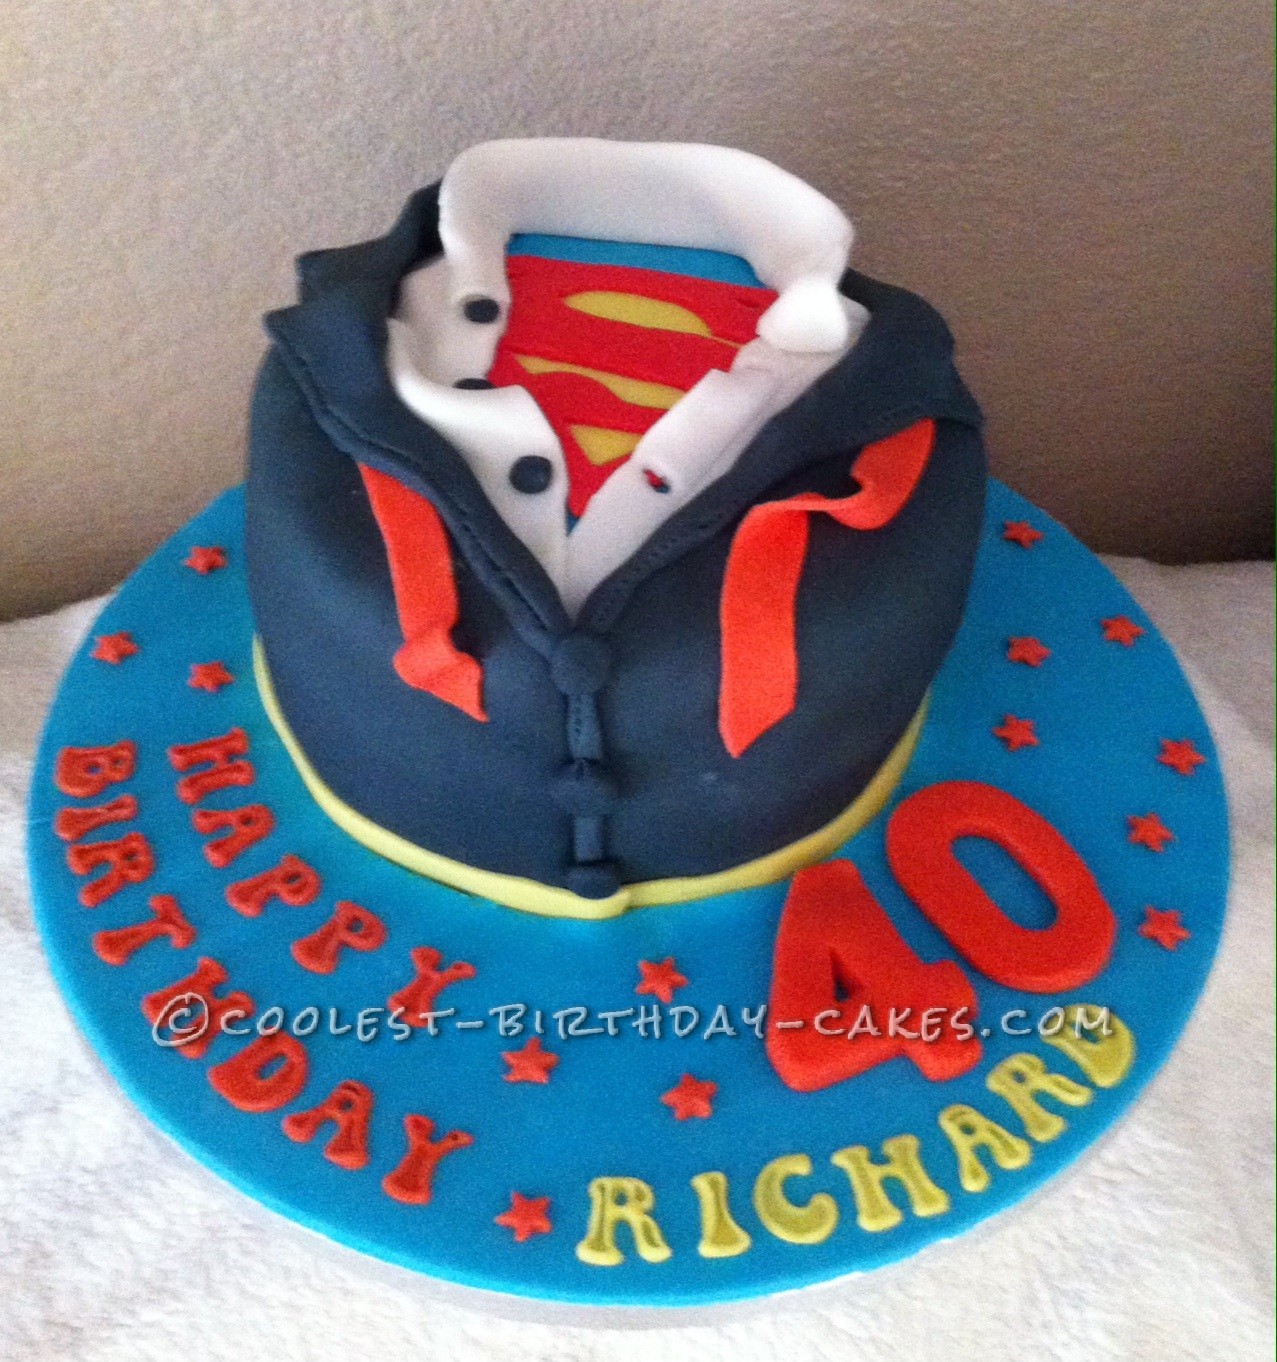 27+ Awesome Picture of Superman Birthday Cake - birijus.com | Superman  birthday cake, Superhero birthday cake, Superman birthday